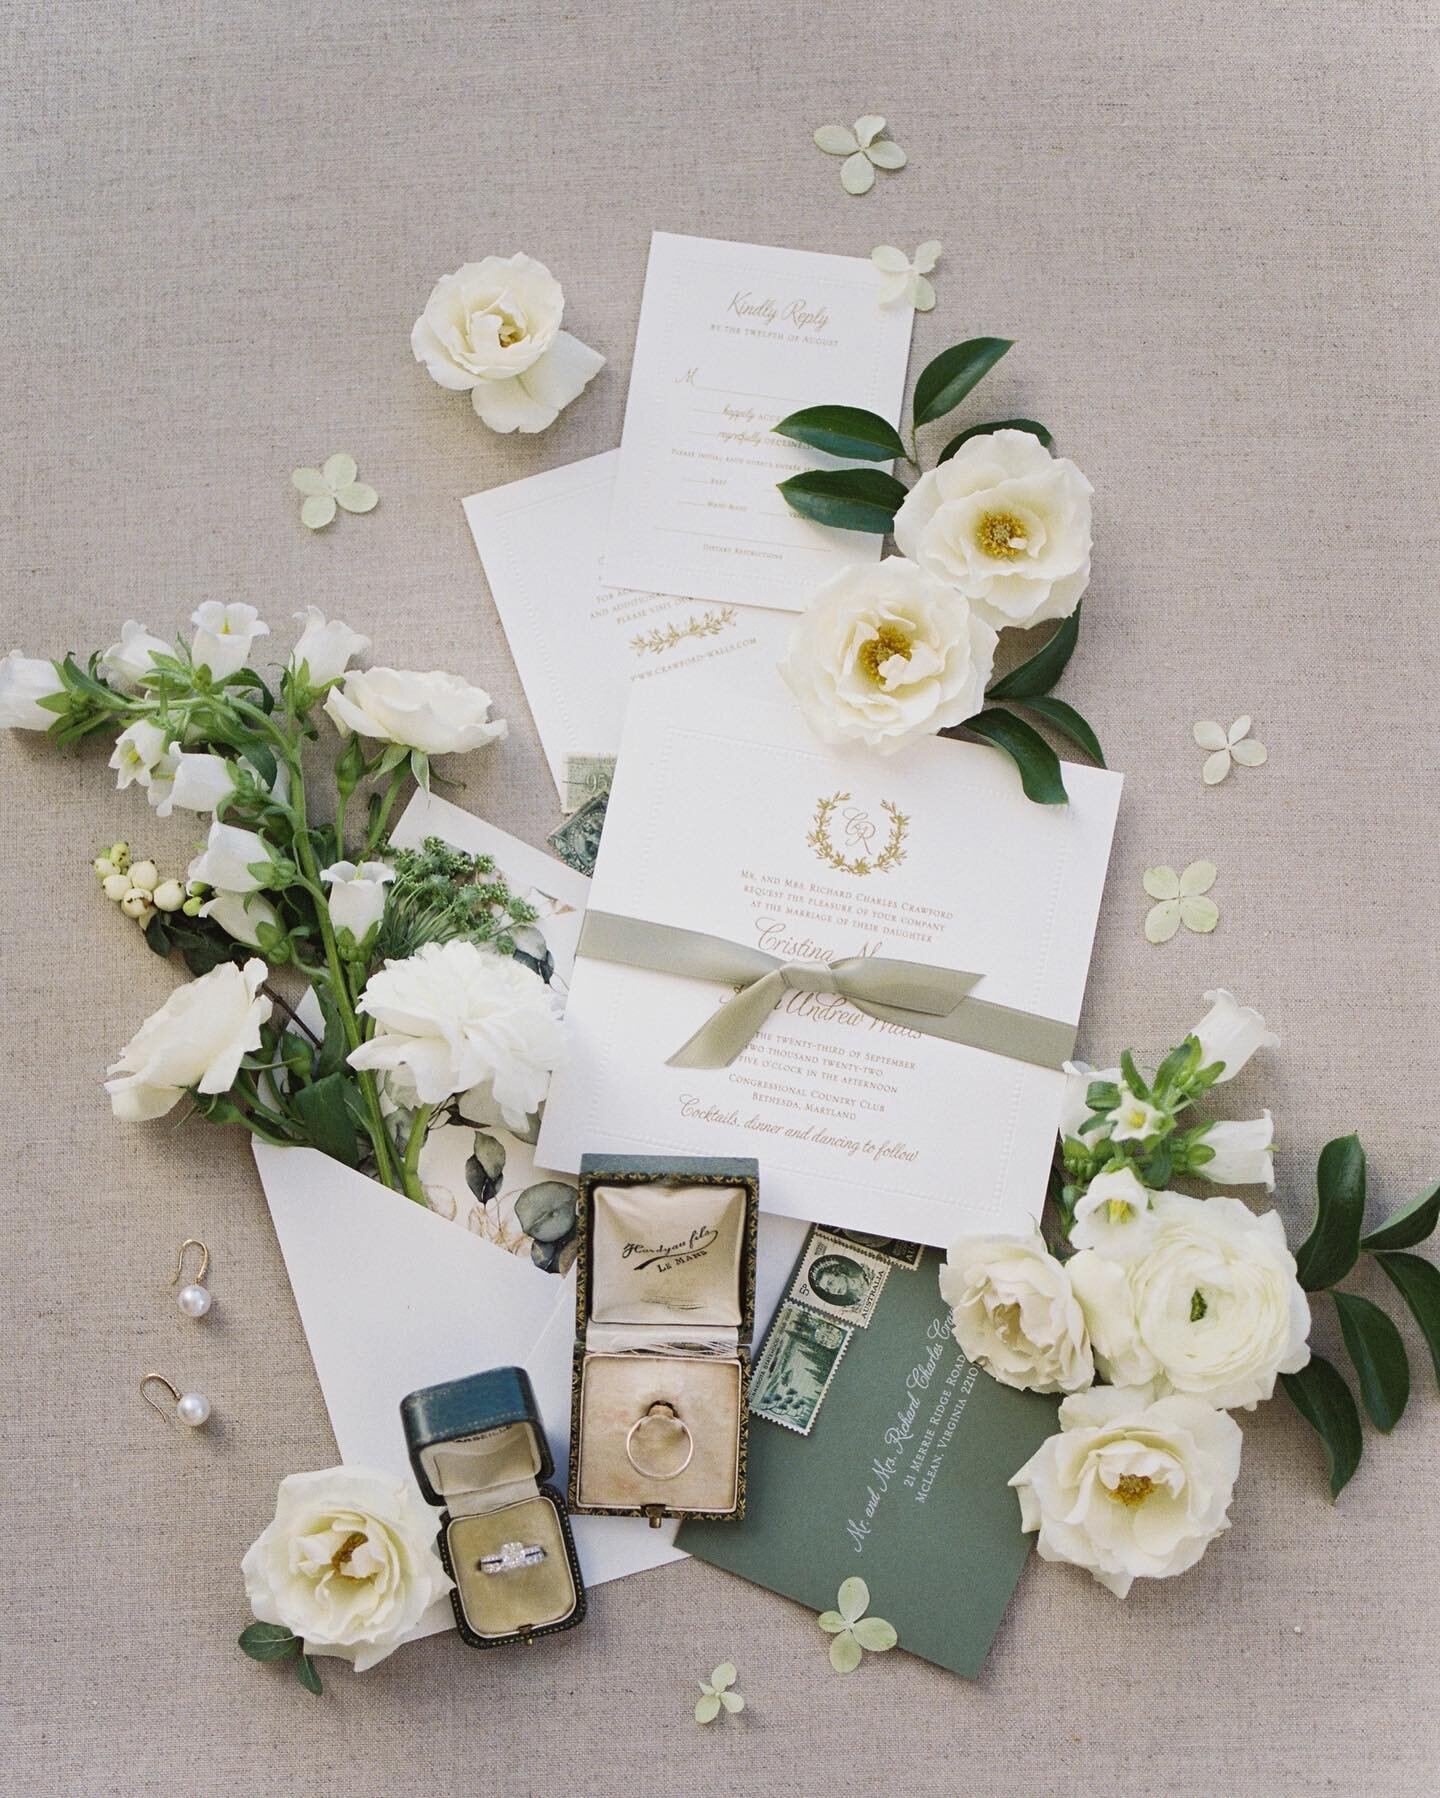 Cristina &amp; Ryan&rsquo;s timeless invitation suite was the perfect peek into their wedding design! ✨ // @marriageandmimosas @darlinganddaughters @thedandelionpatch @rewindfilmlab @locustcollection